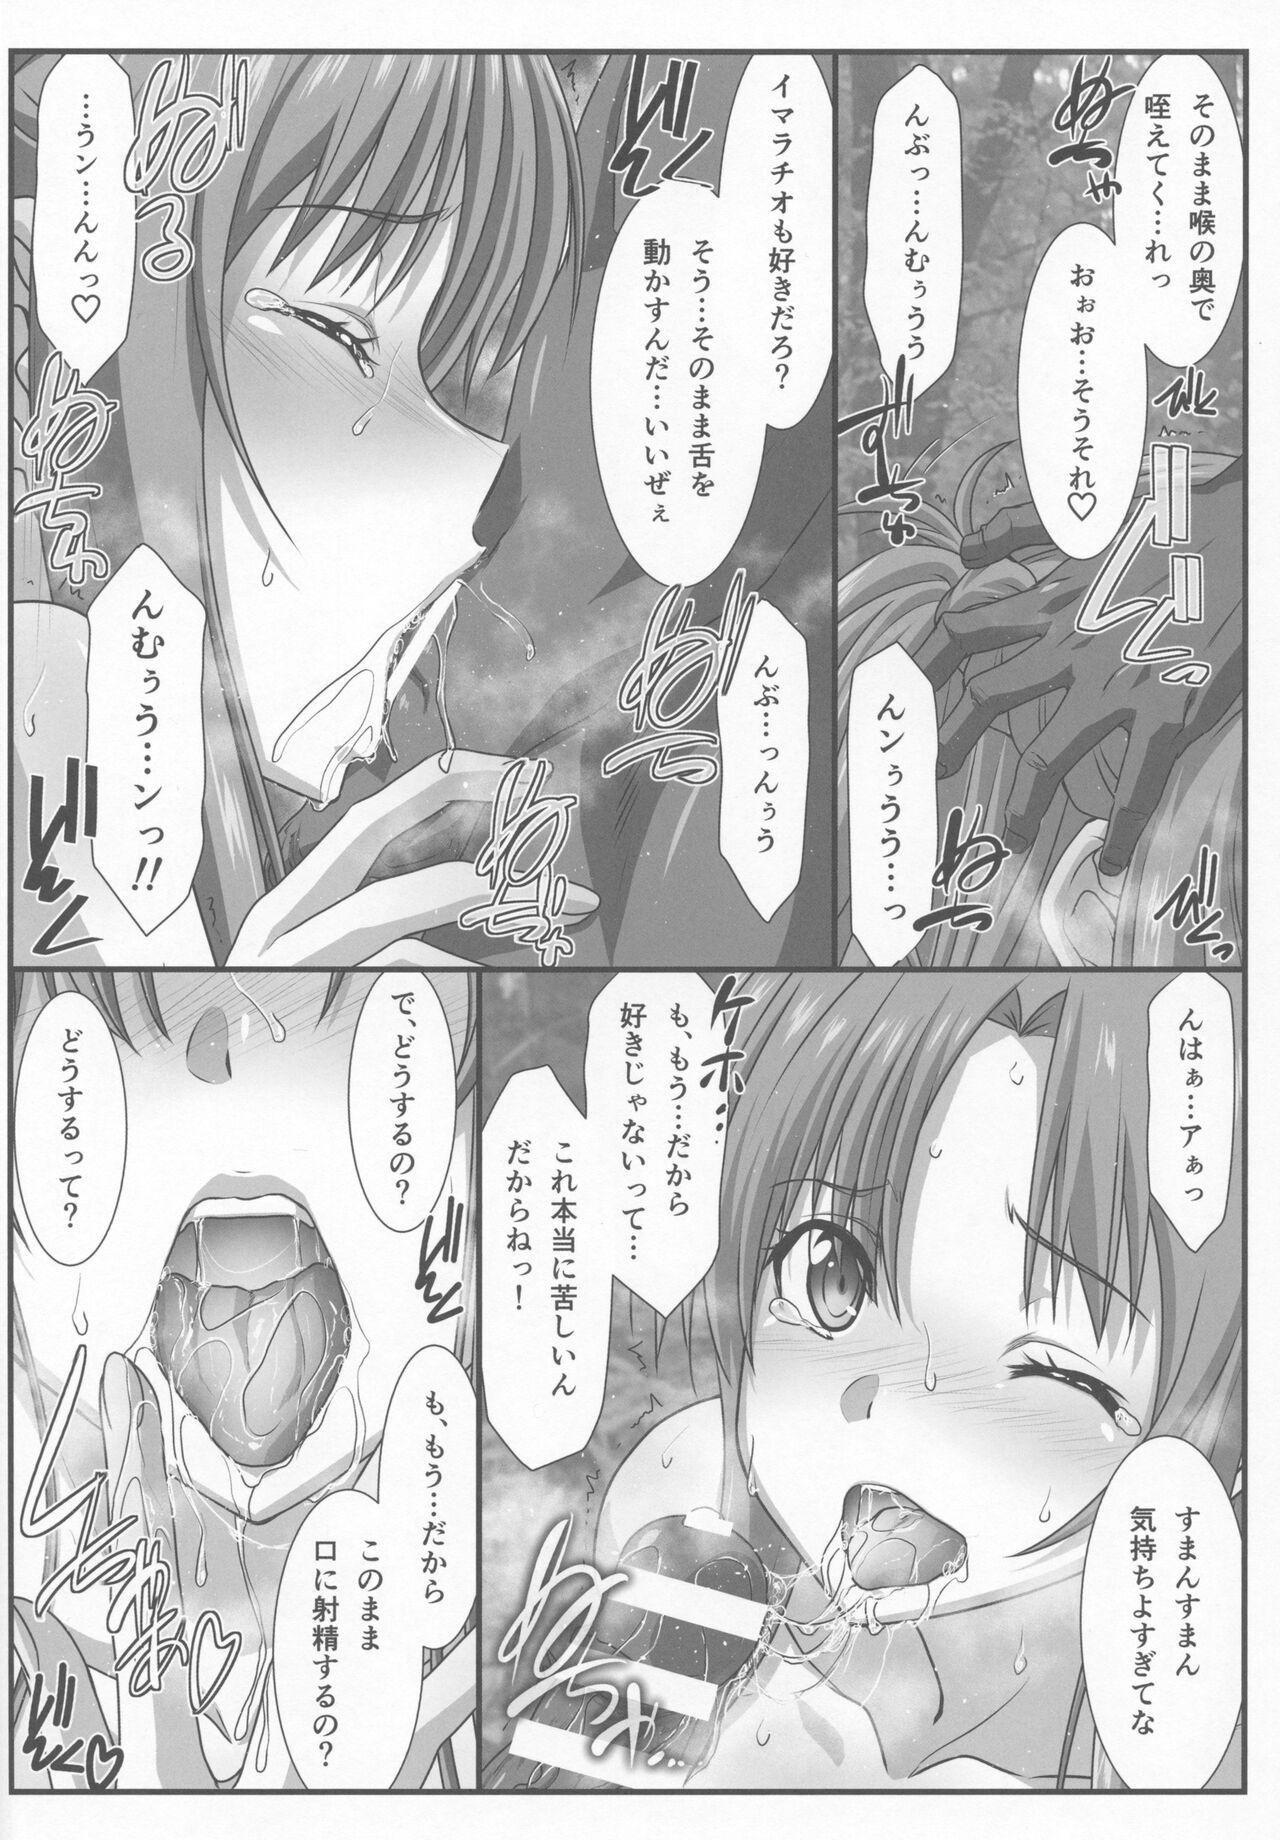 Vadia Astral Bout Ver. 45 - Sword art online Fetiche - Page 7